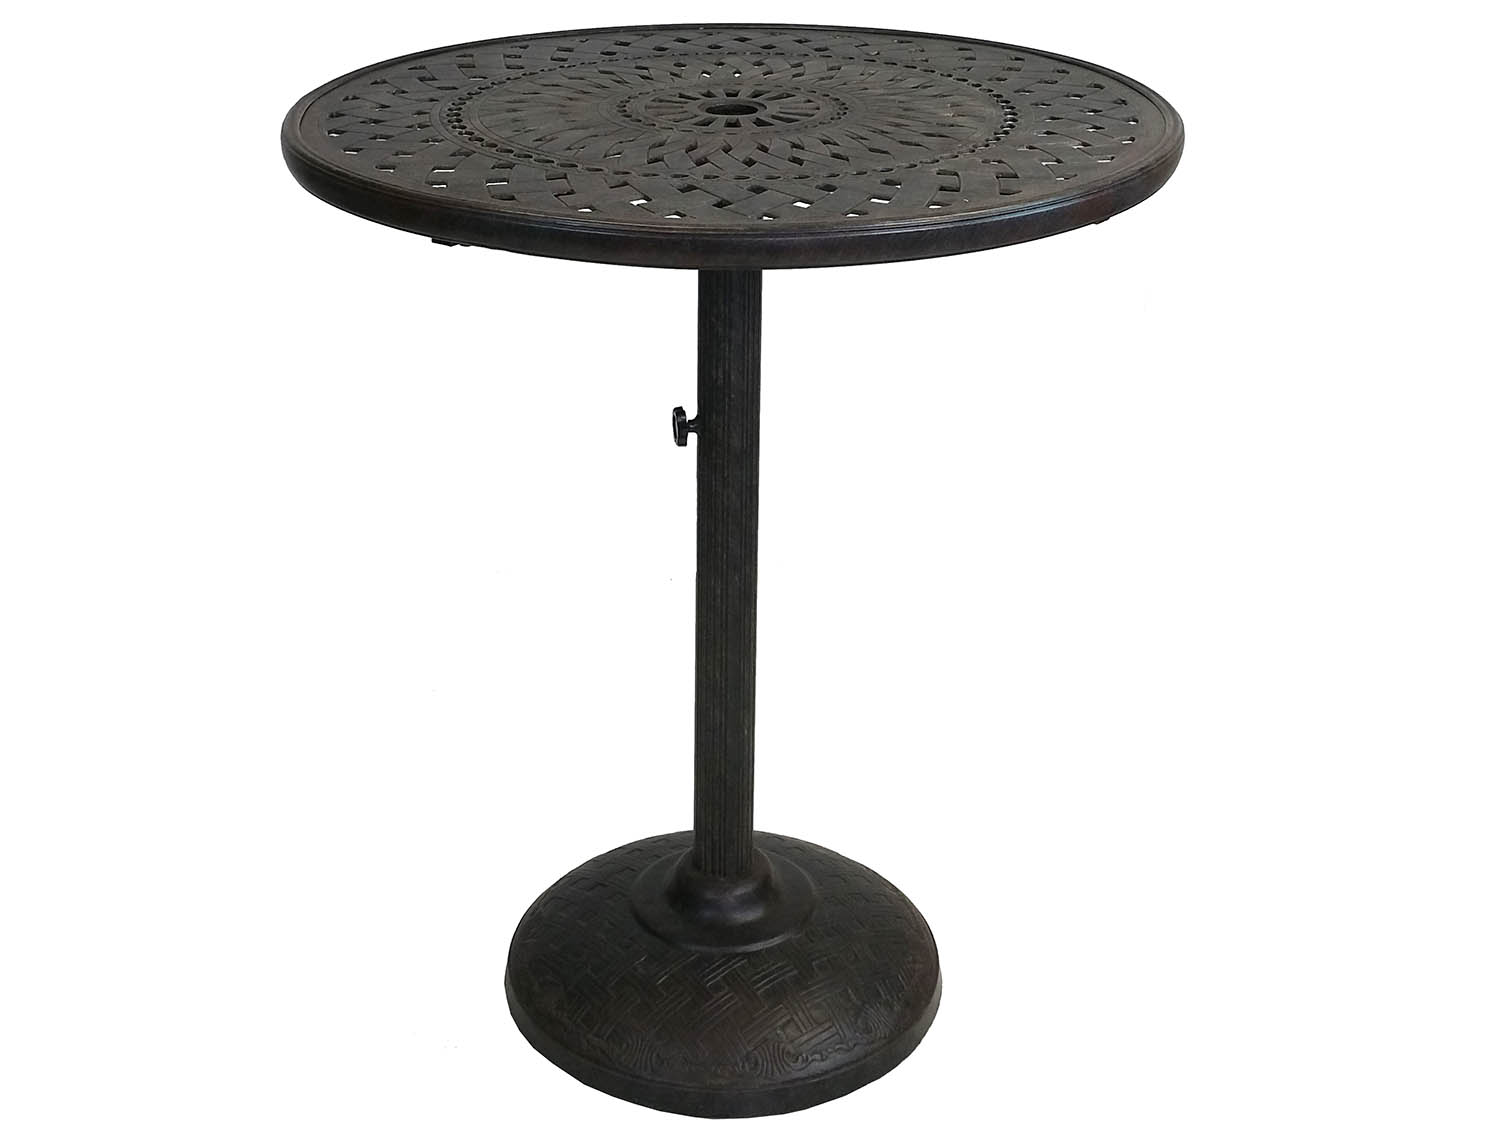 Belmont 36 Inch Bar Table W/ Built In Umbrella Stand